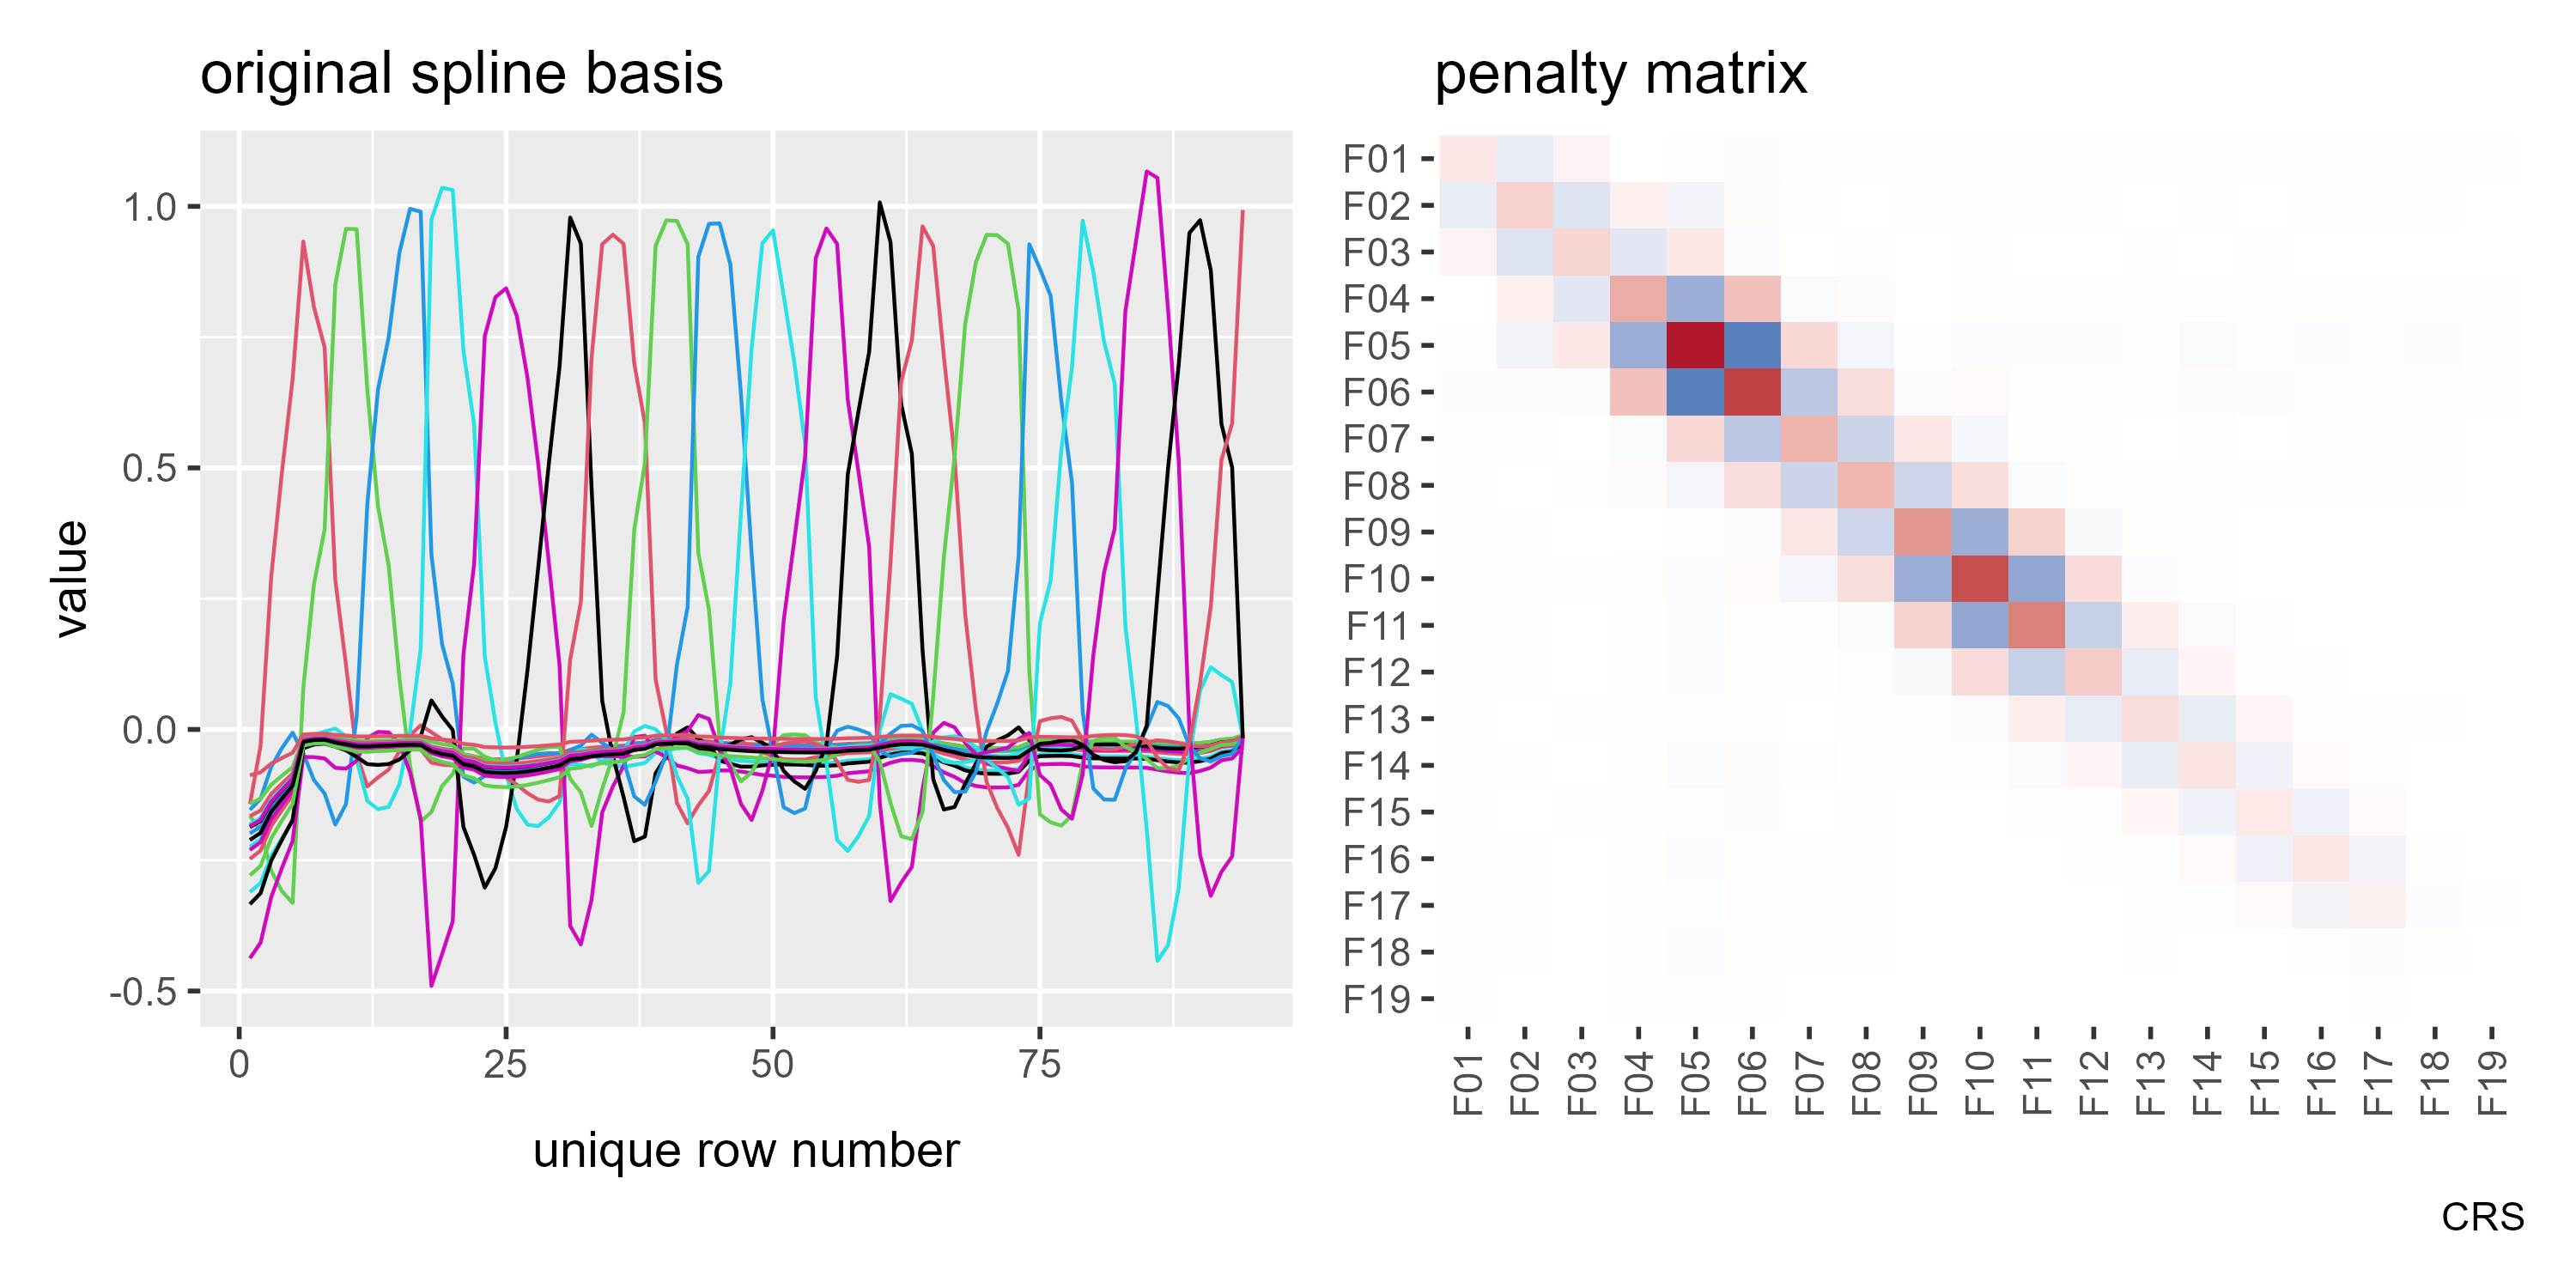 Left: A matrix plot with one line per column. This looks like the bases plotted above, with 1 line per column and they form a nice series of spiky lines. Right: The penalty matrix shown earlier.